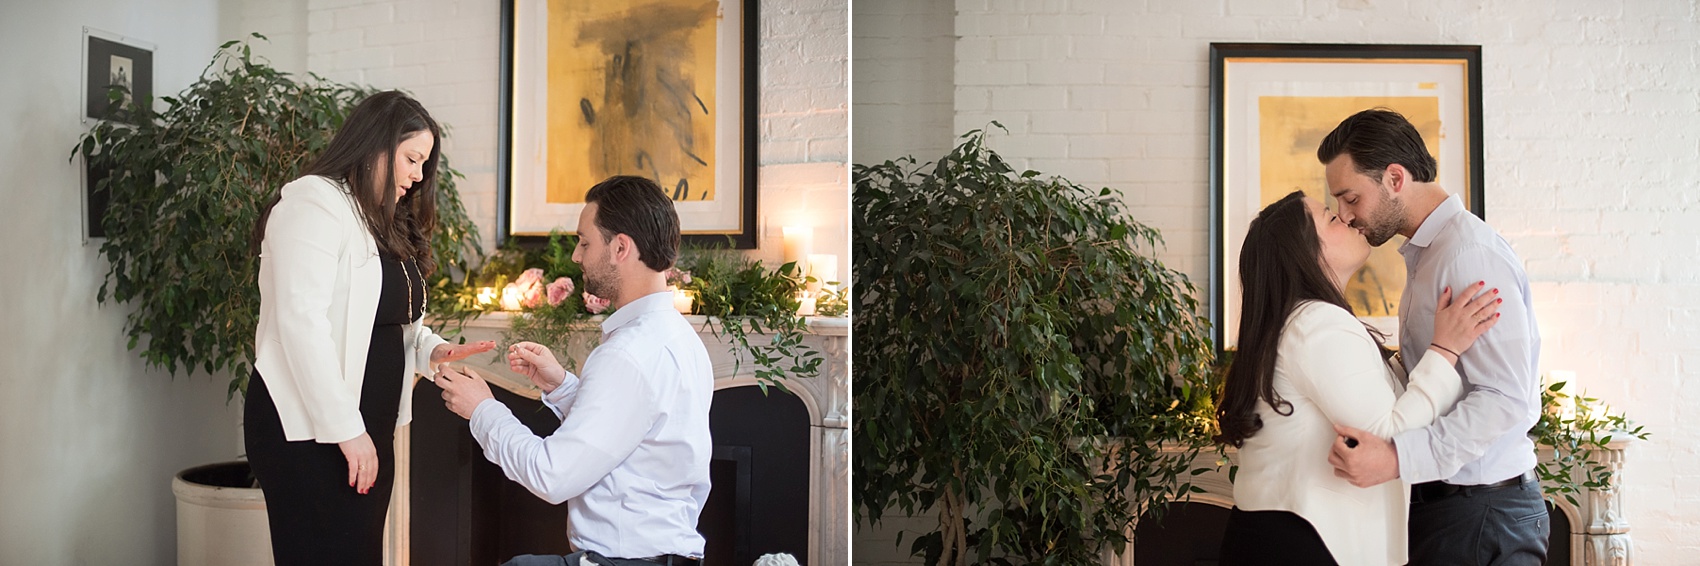 NYC Proposal in Chelsea, Haven's Kitchen. Photos by NYC wedding photographer Mikkel Paige.